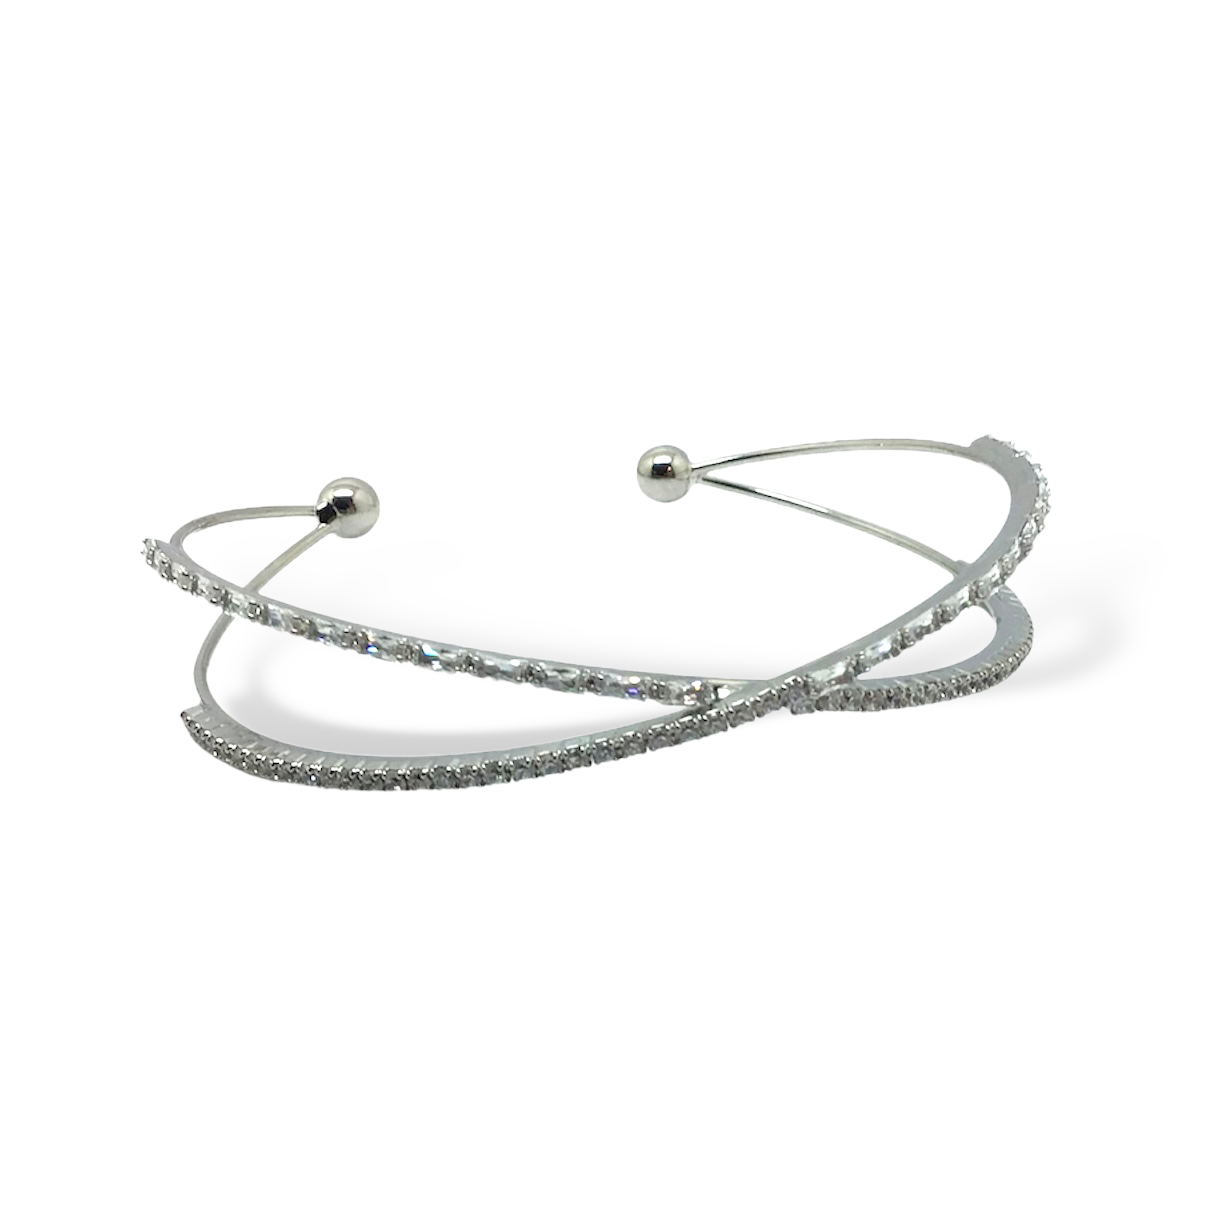 Silver Bangles|Nicolette|Jeanette Maree|Shop Online Now